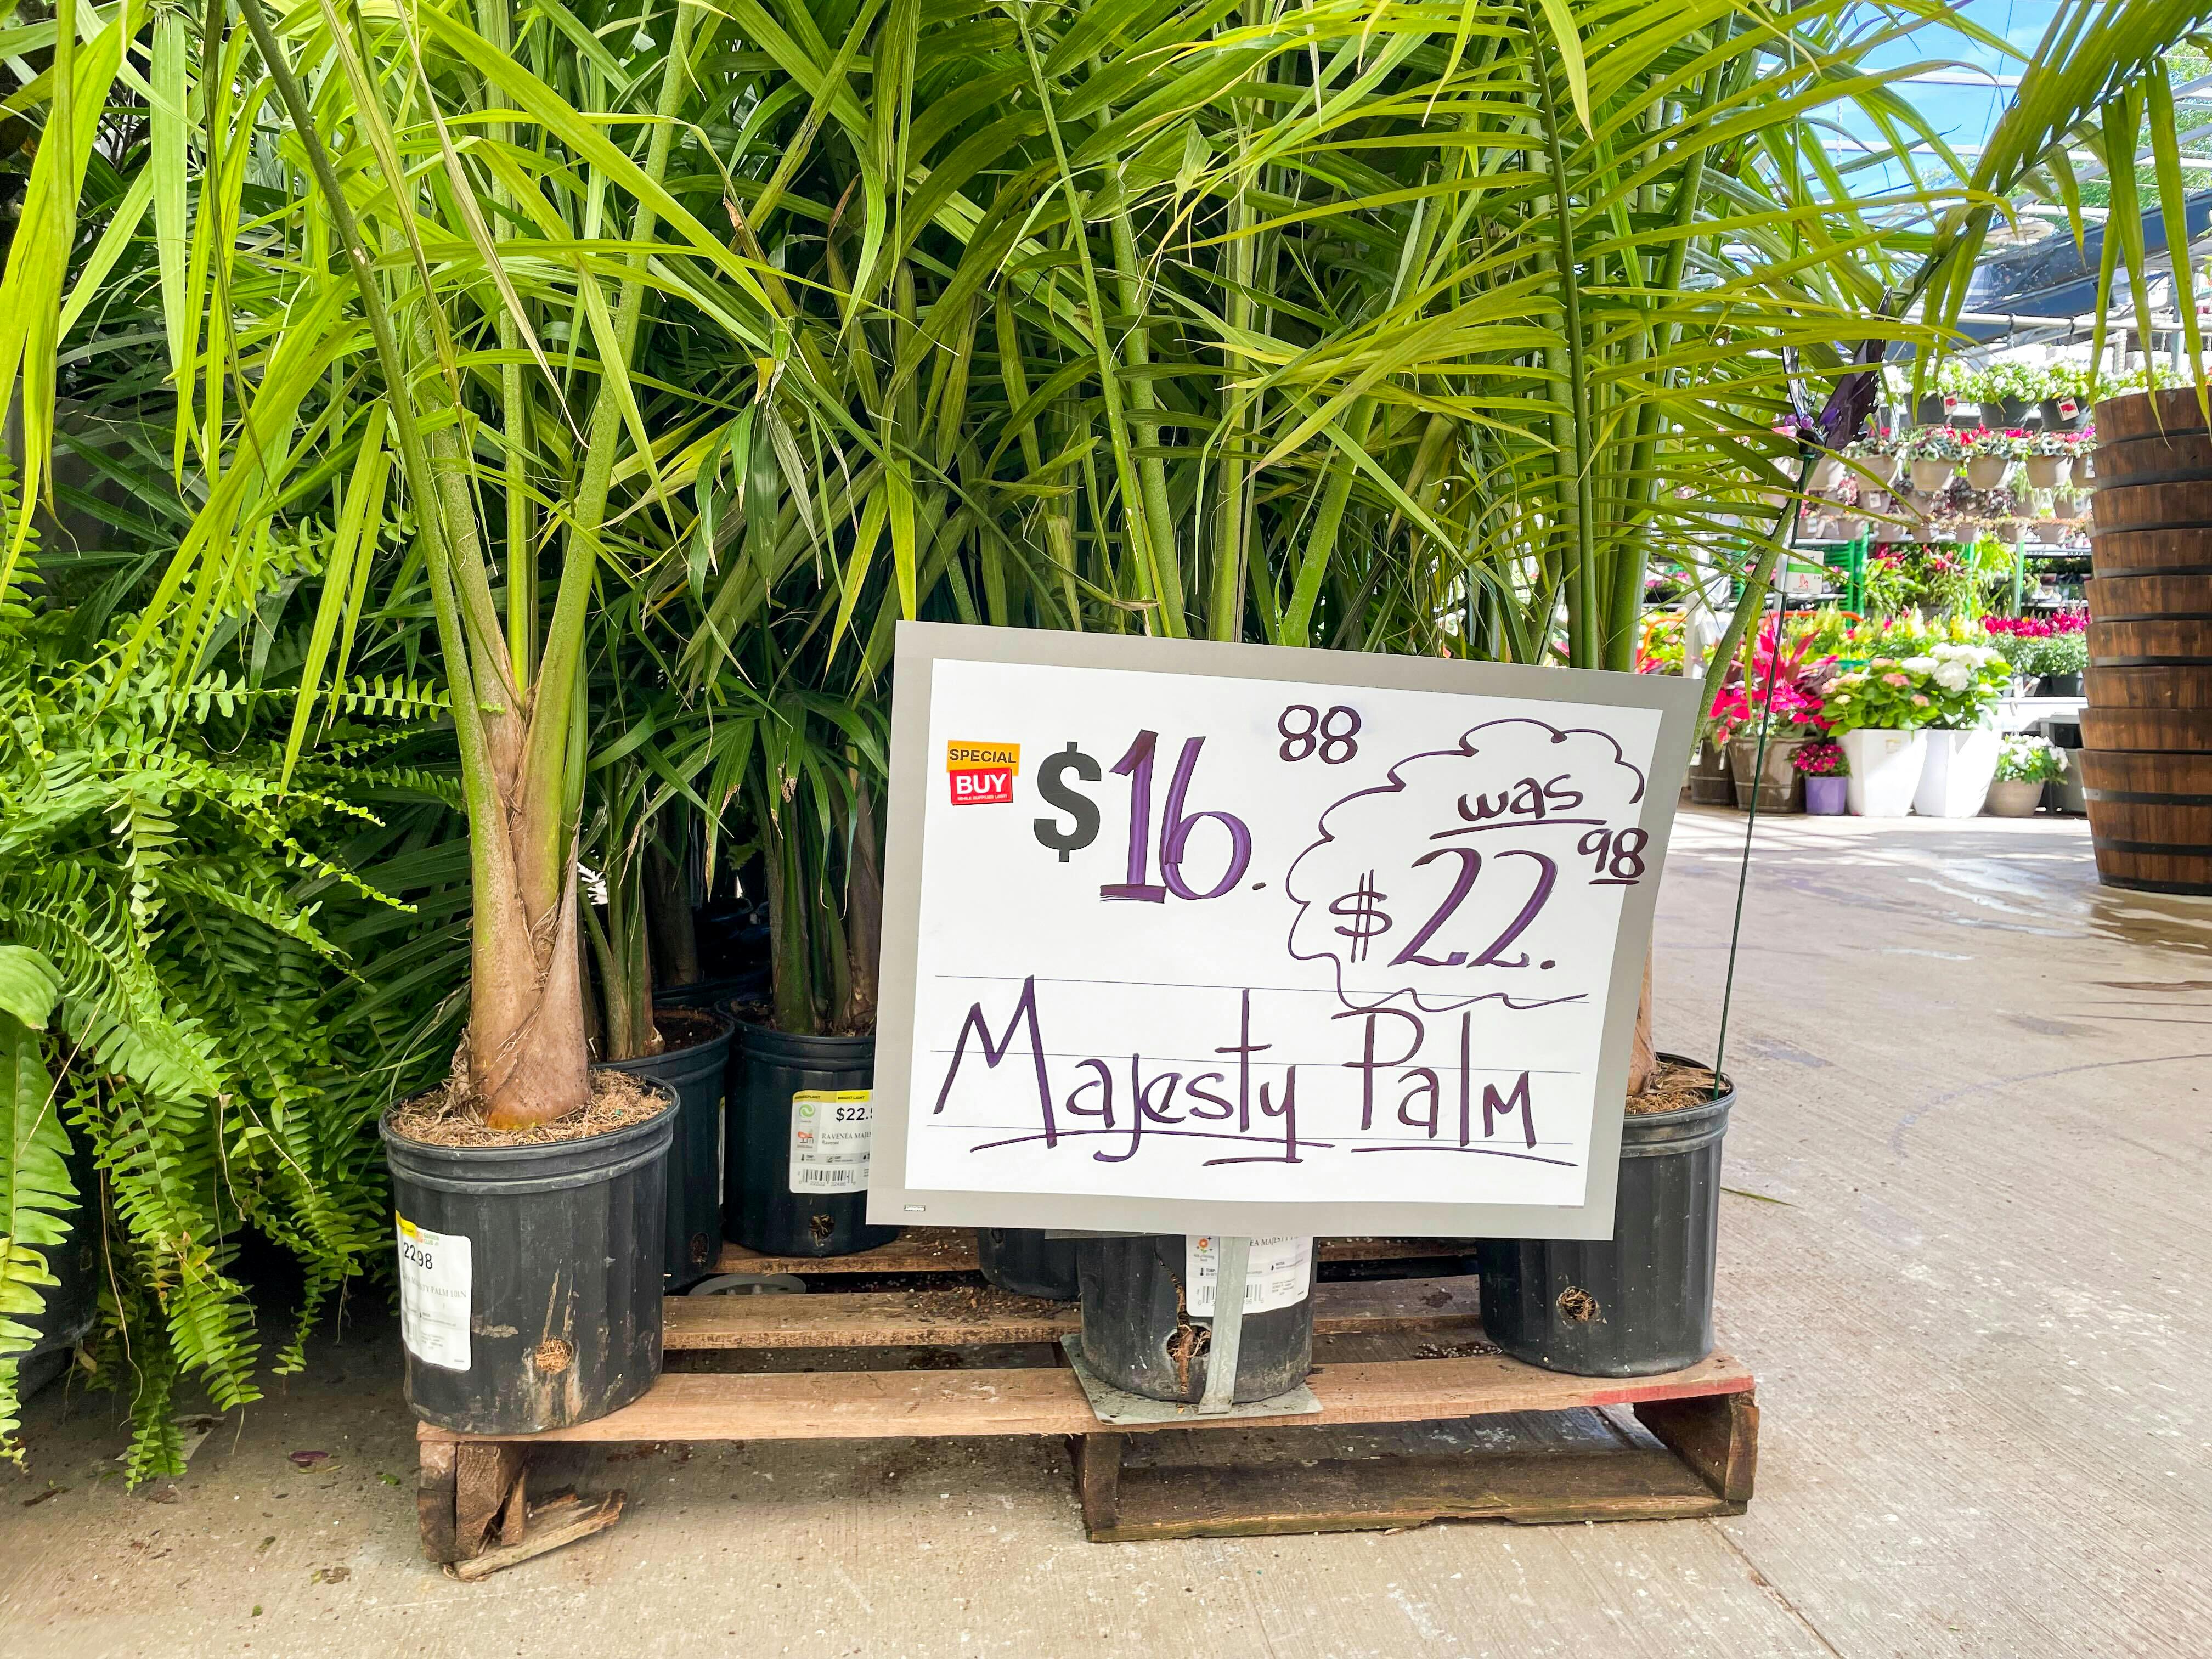 Majesty Palm houseplants on a pallet at the home depot garden center with a $16.88 special buy price tag